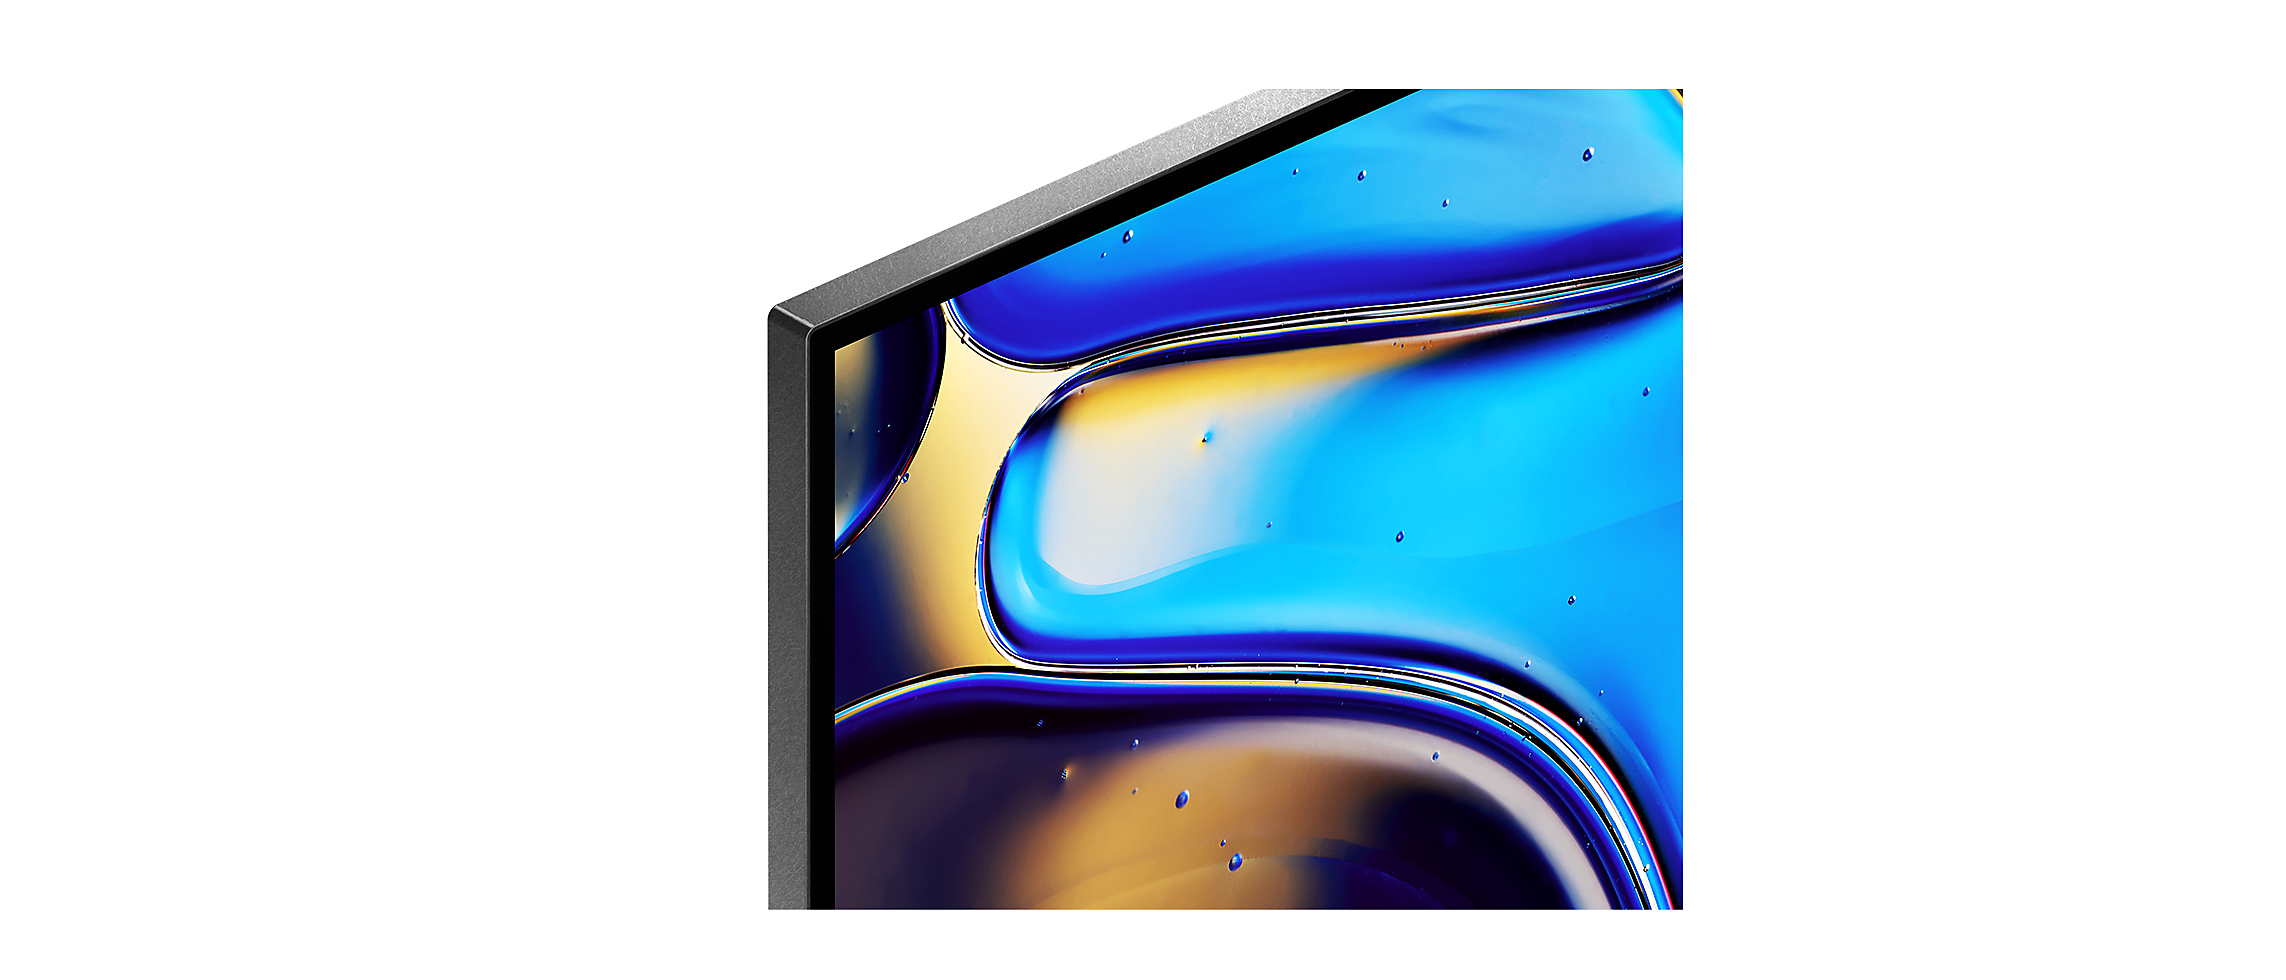 Detail of bezel of BRAVIA 8 with screenshot of blue water droplets